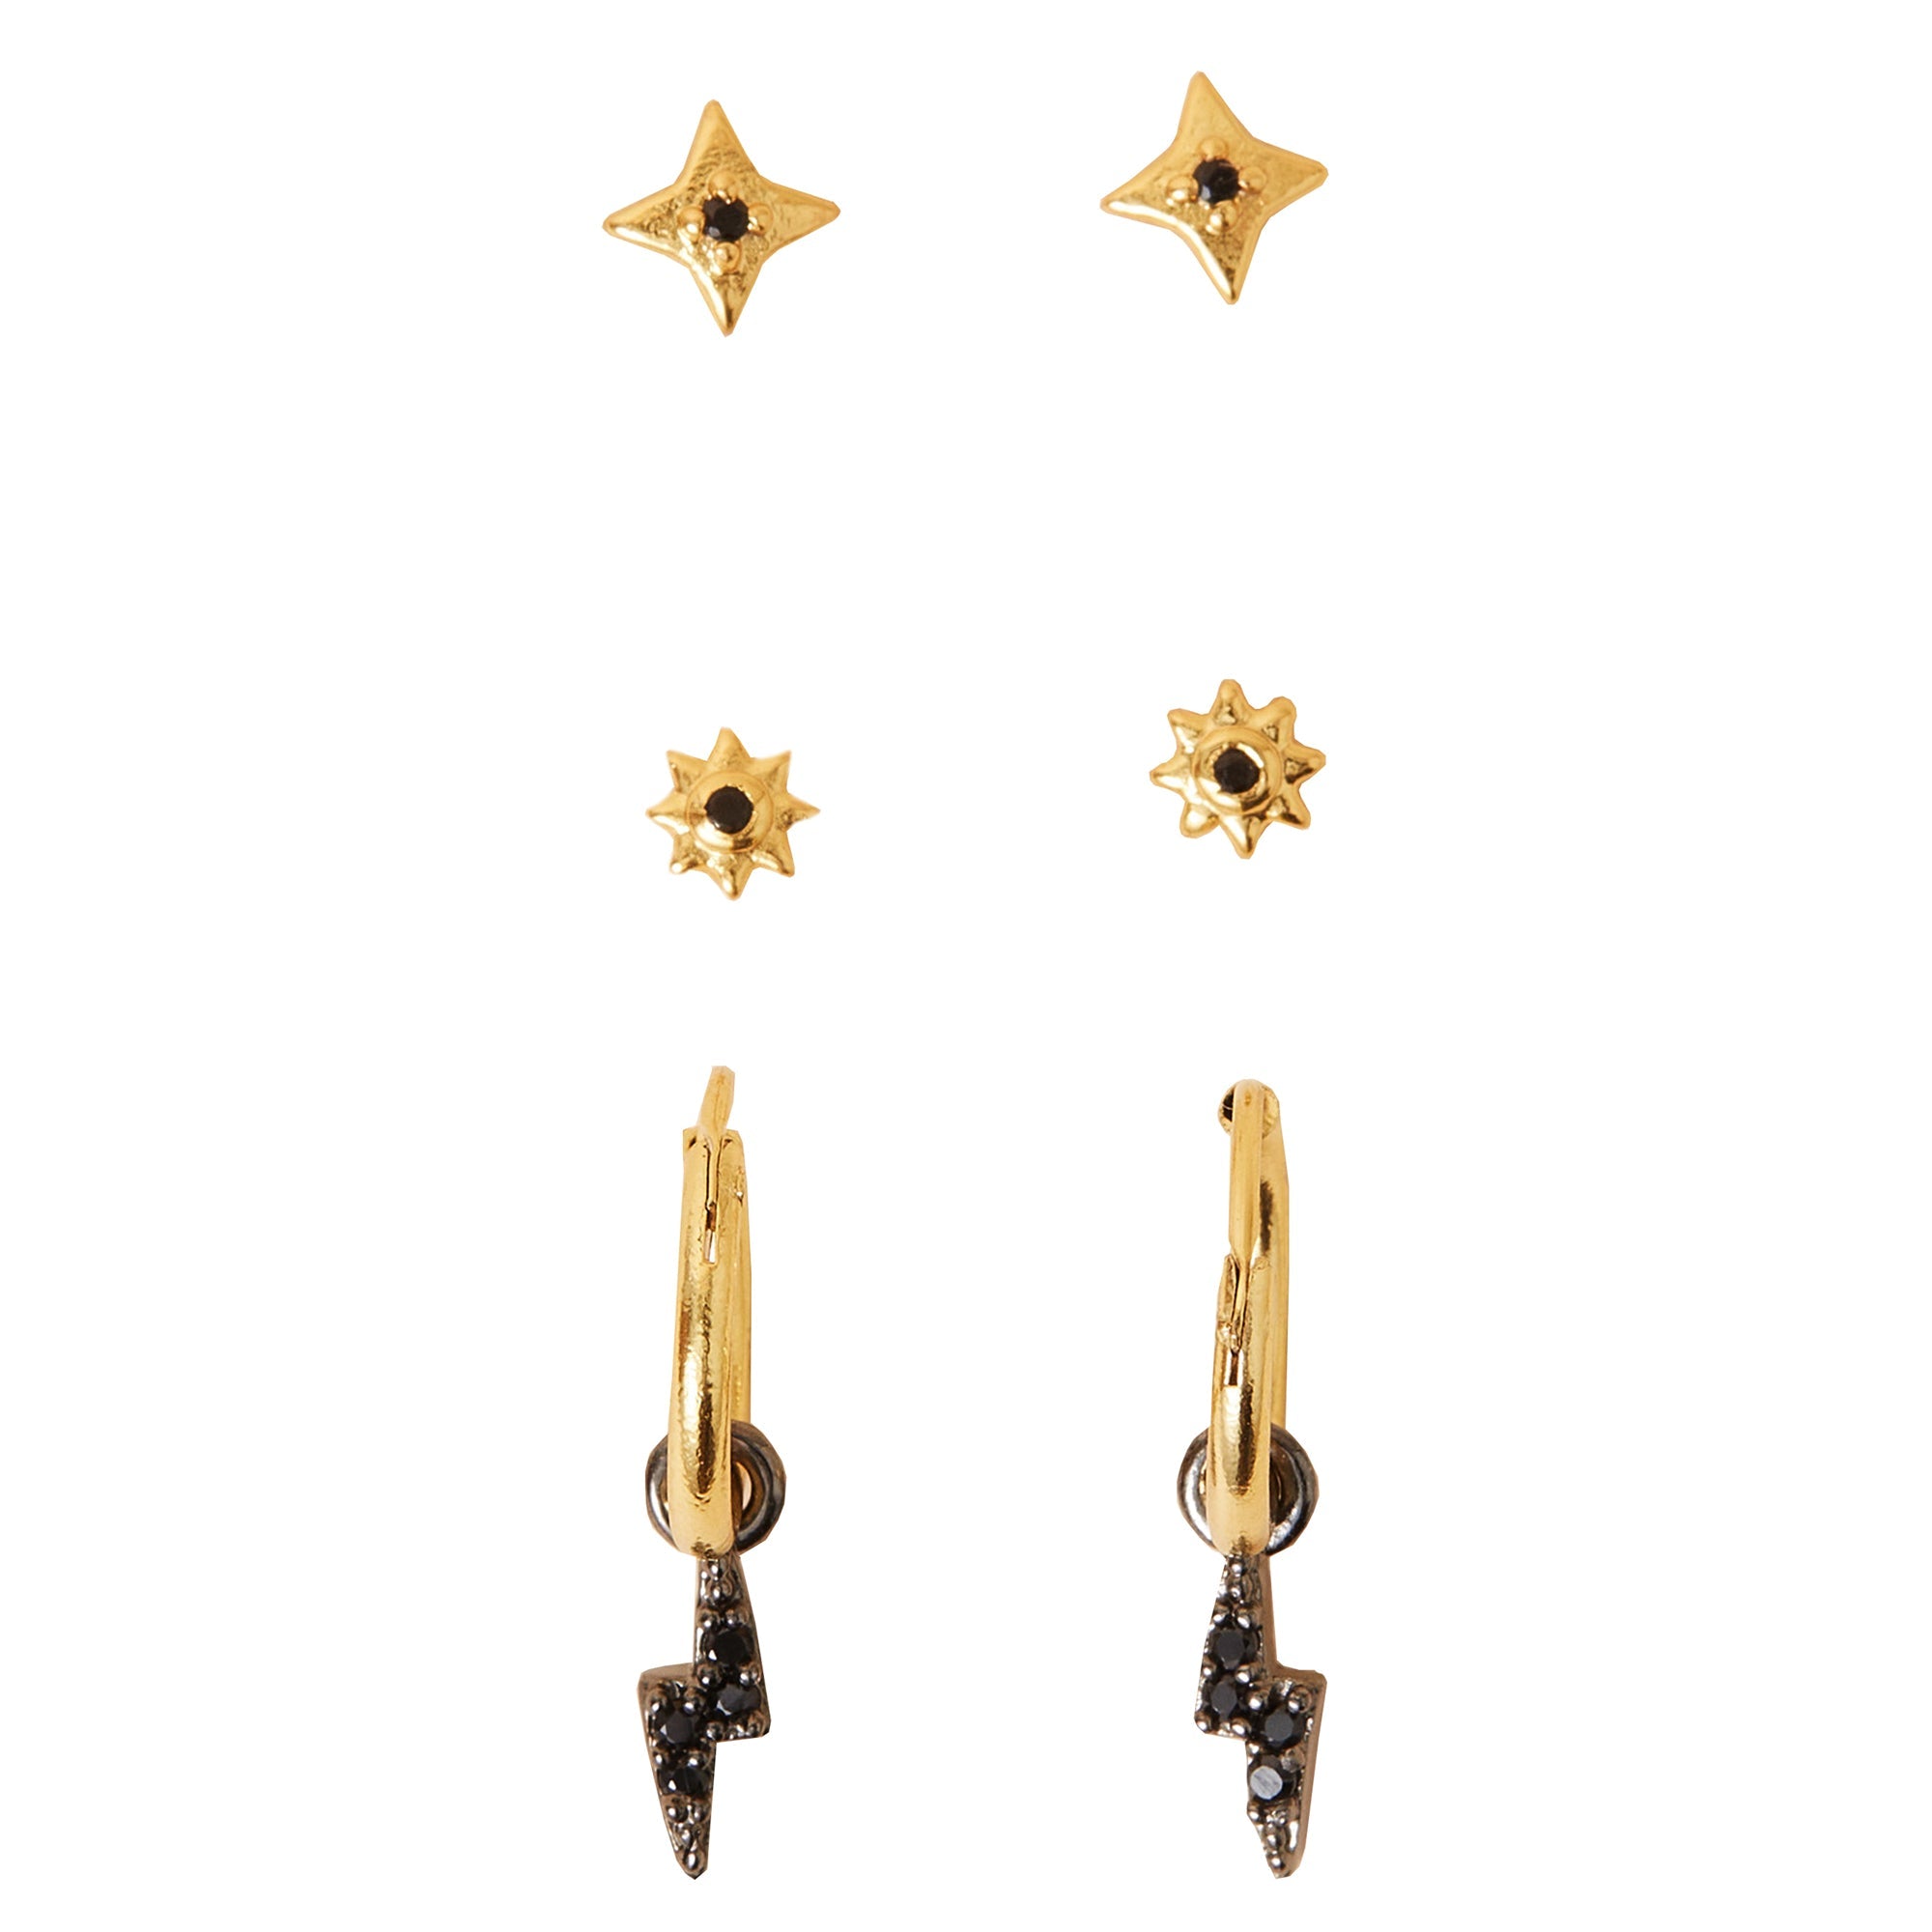 Real Gold Plated Z Rhodium Earrings Set of 3 For Women By Accessorize London